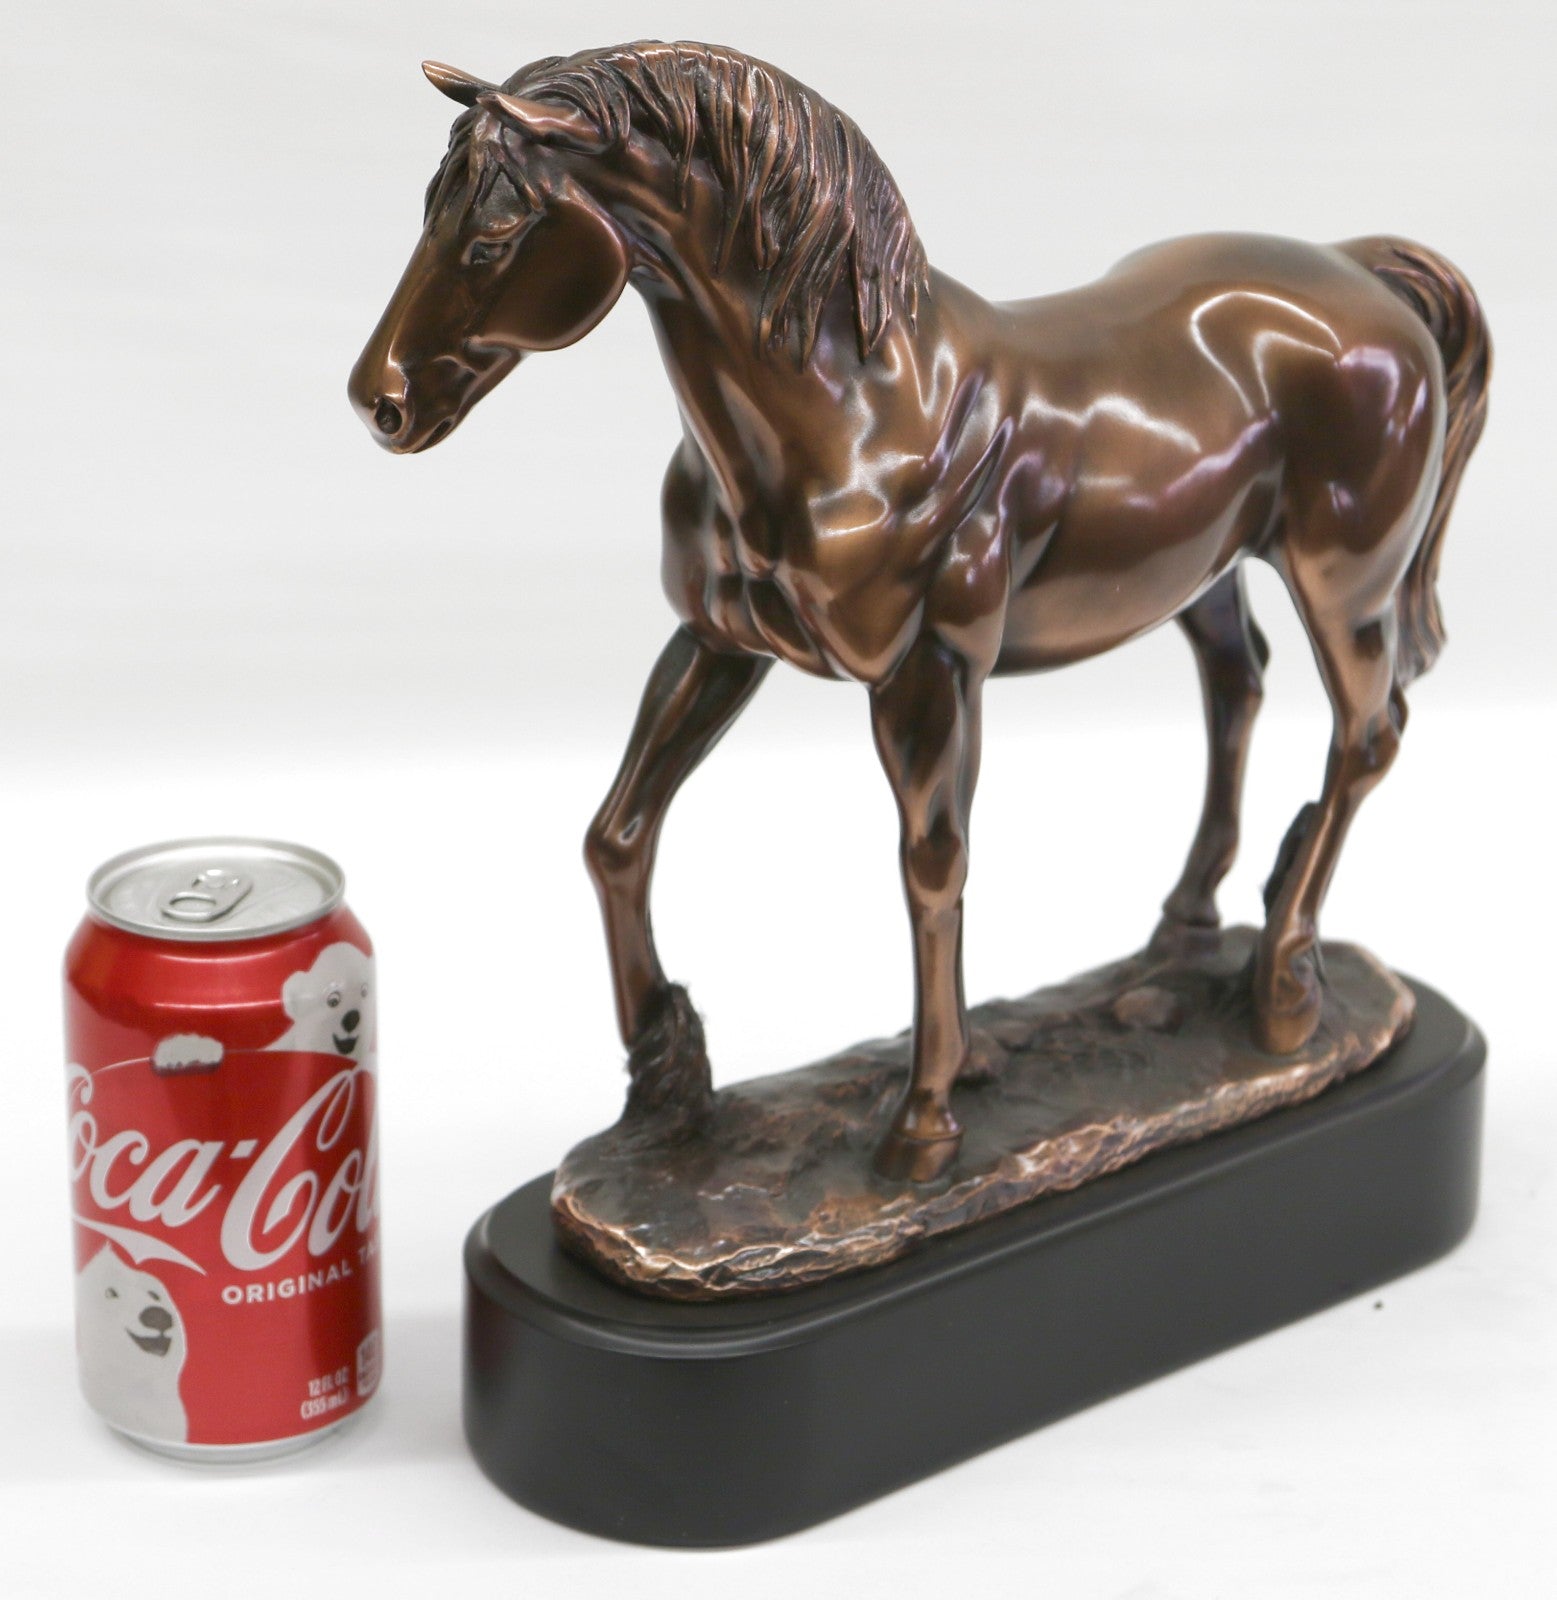 Horse Pony ornament sculpture figurine quality European Bronzed 33cm, gift boxed